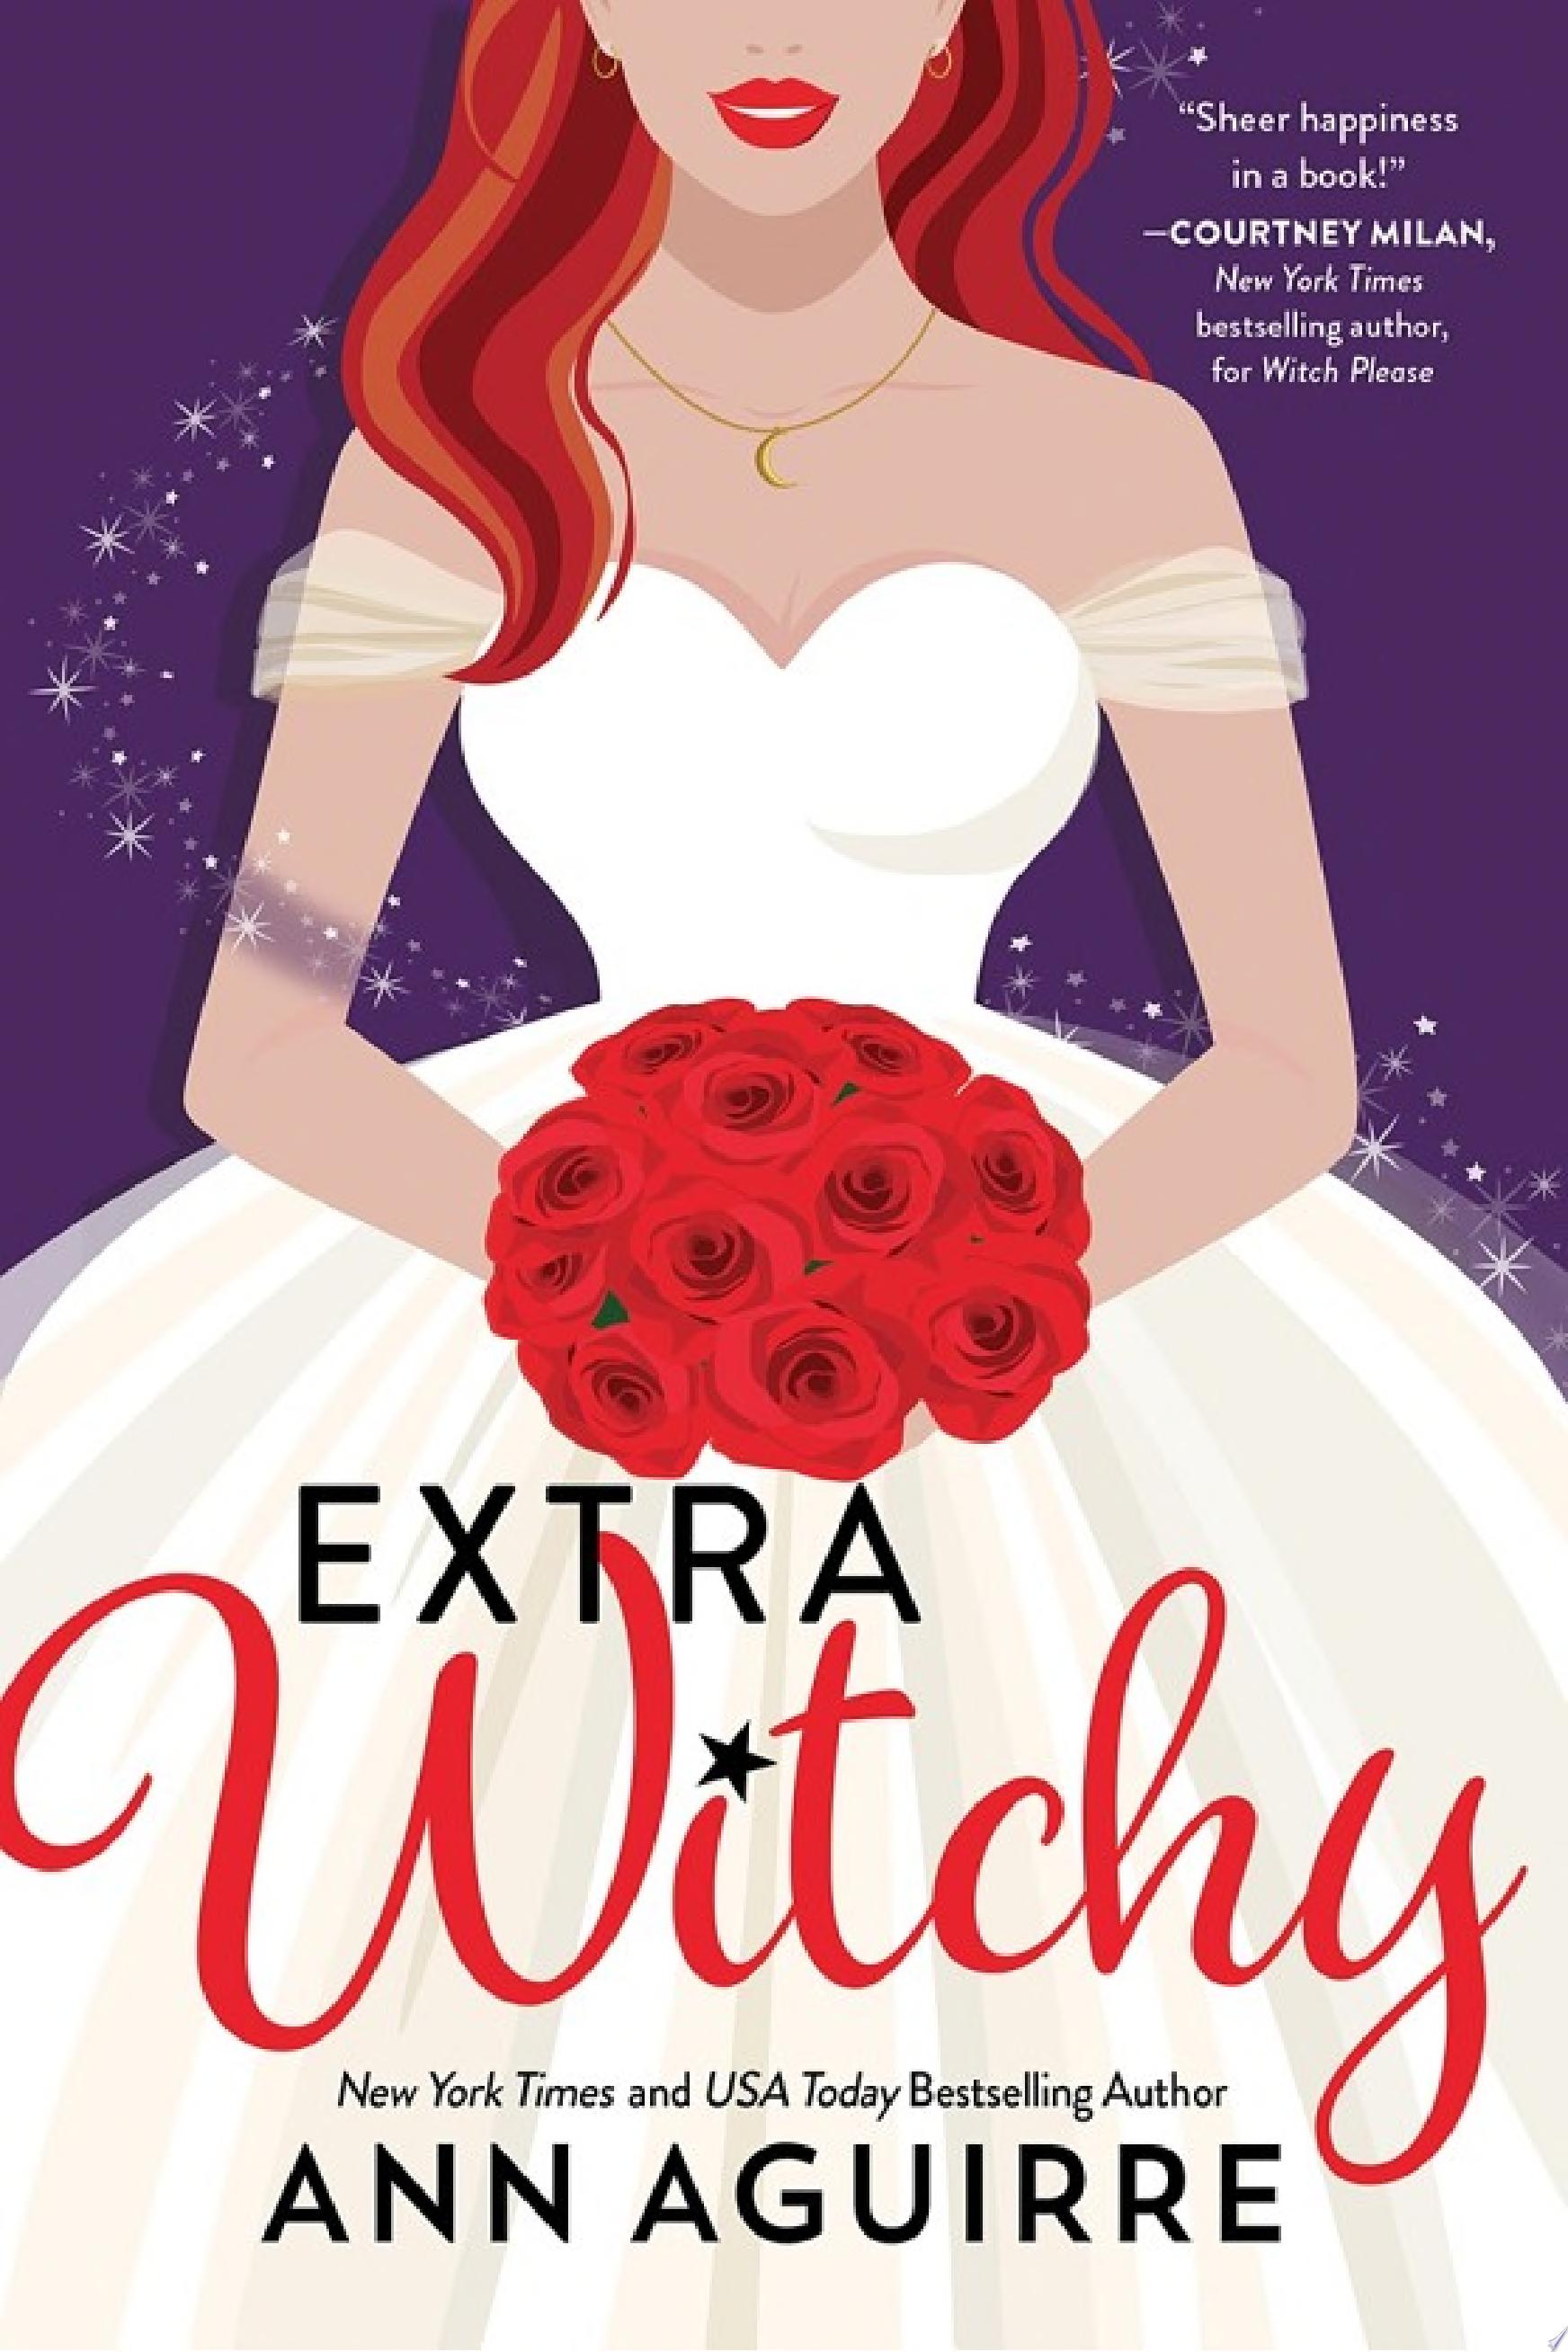 Image for "Extra Witchy"